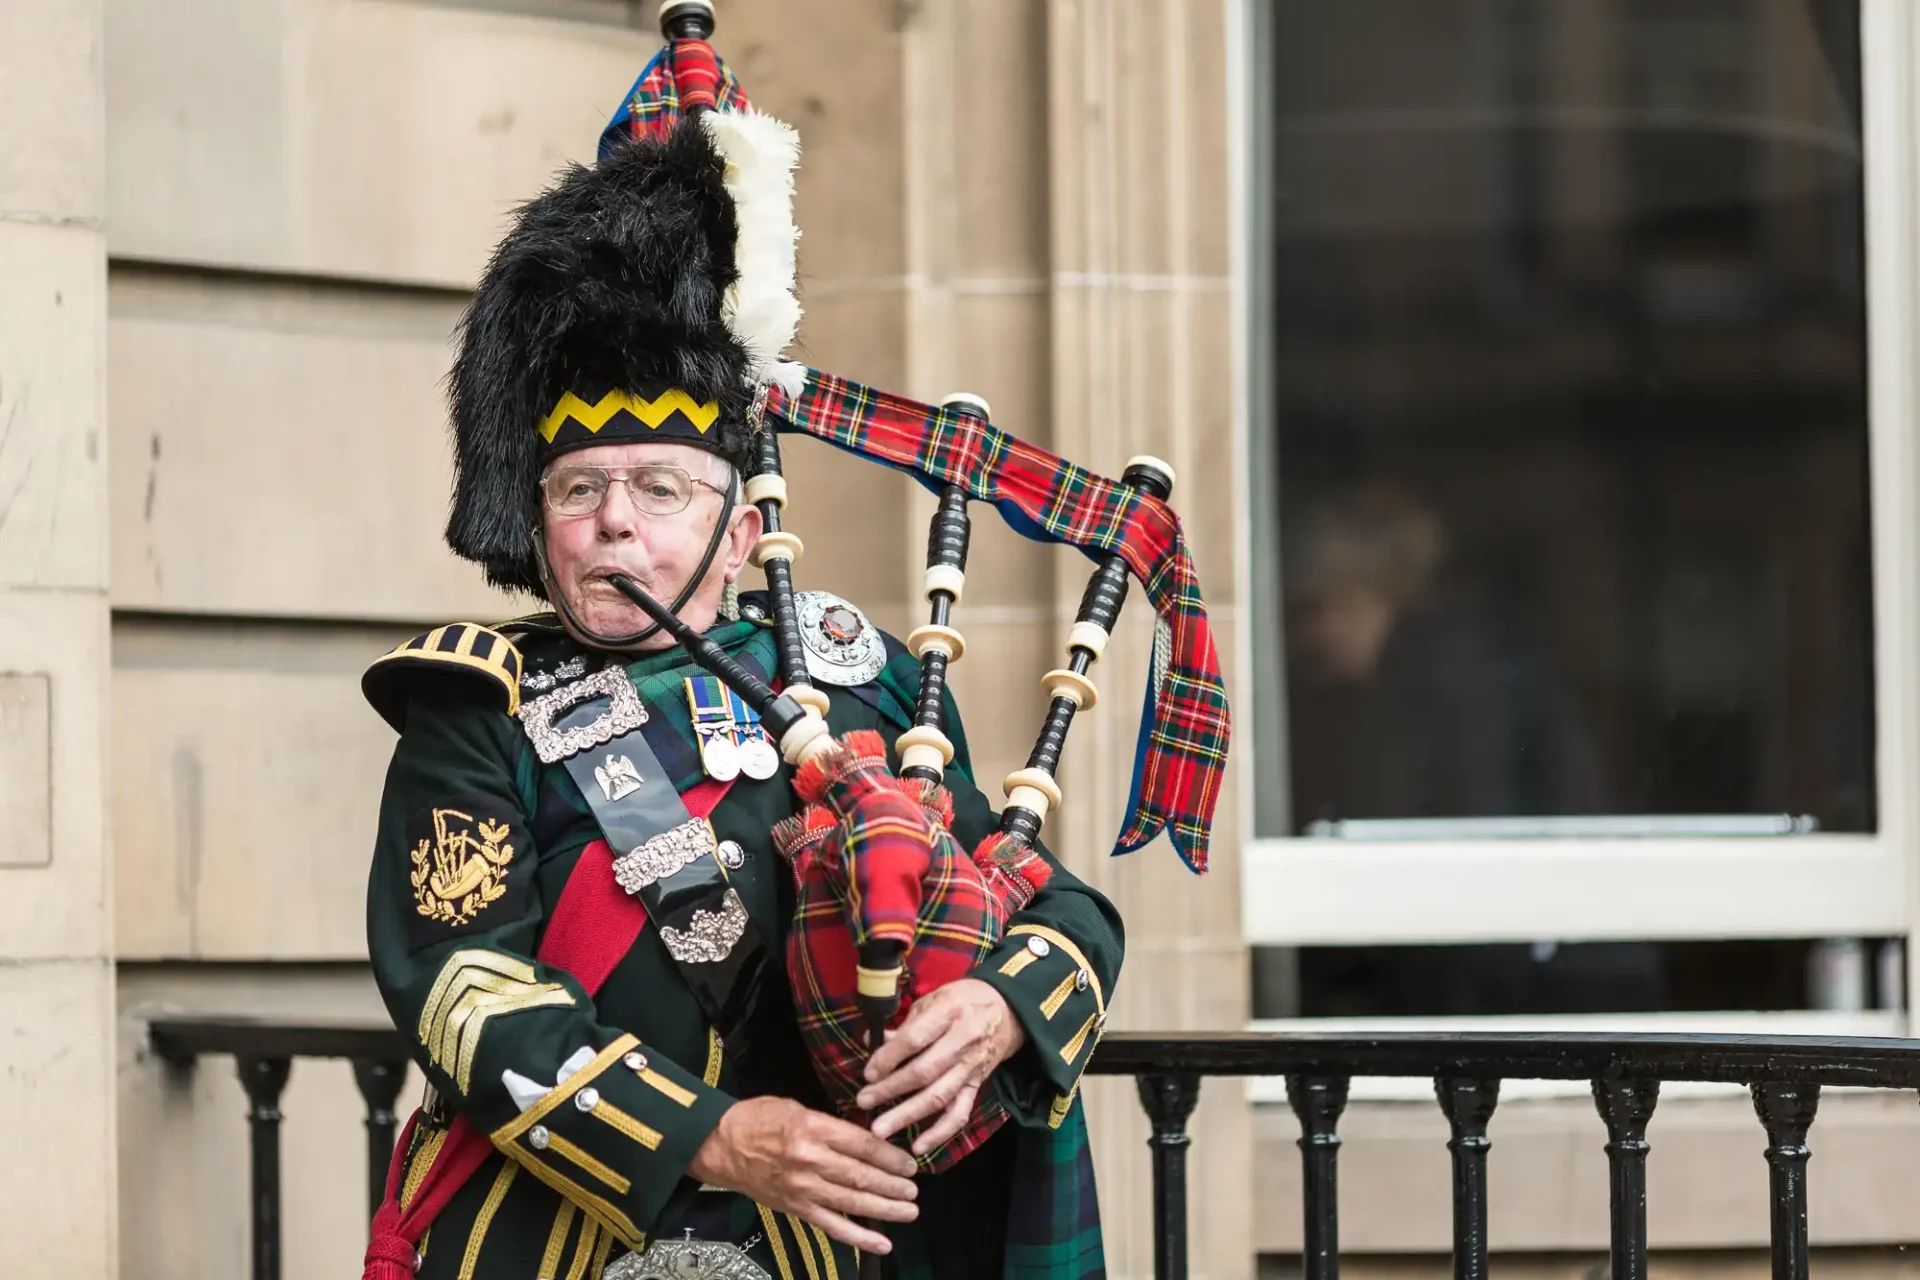 A bagpiper in traditional scottish attire, including a feathered hat and tartan kilt, plays the bagpipes outside a building.